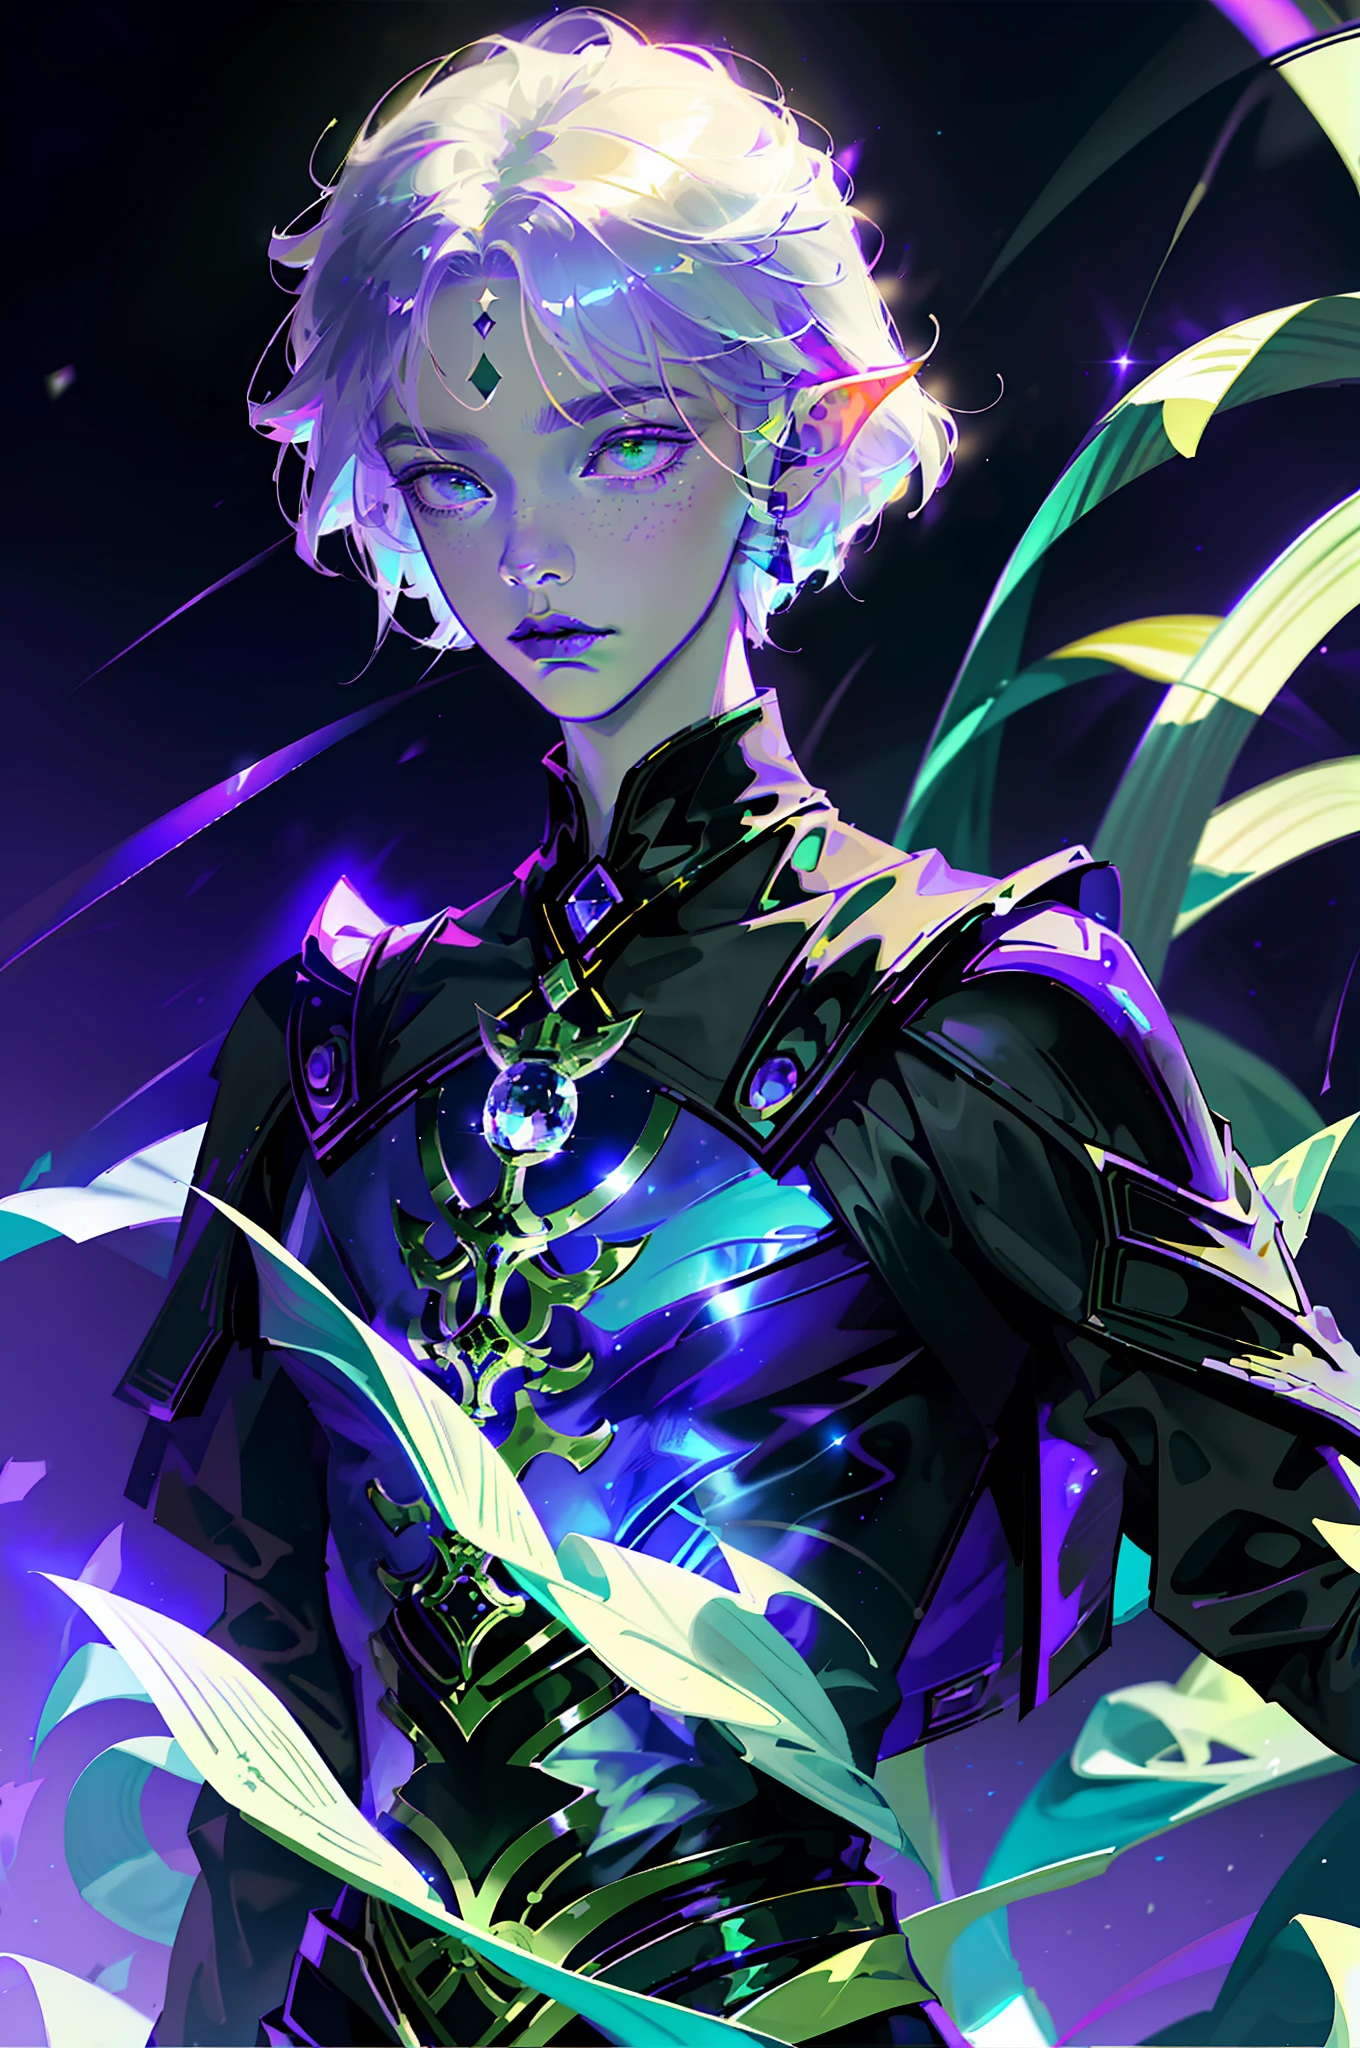 masterpiece, high resolution, high quality, intrincated details, A male elf, magic particles, night landscape, wearing black shiny clothe, purple hair, green eyes, milky skin, innocent expression, soft vine, stars, fantasy